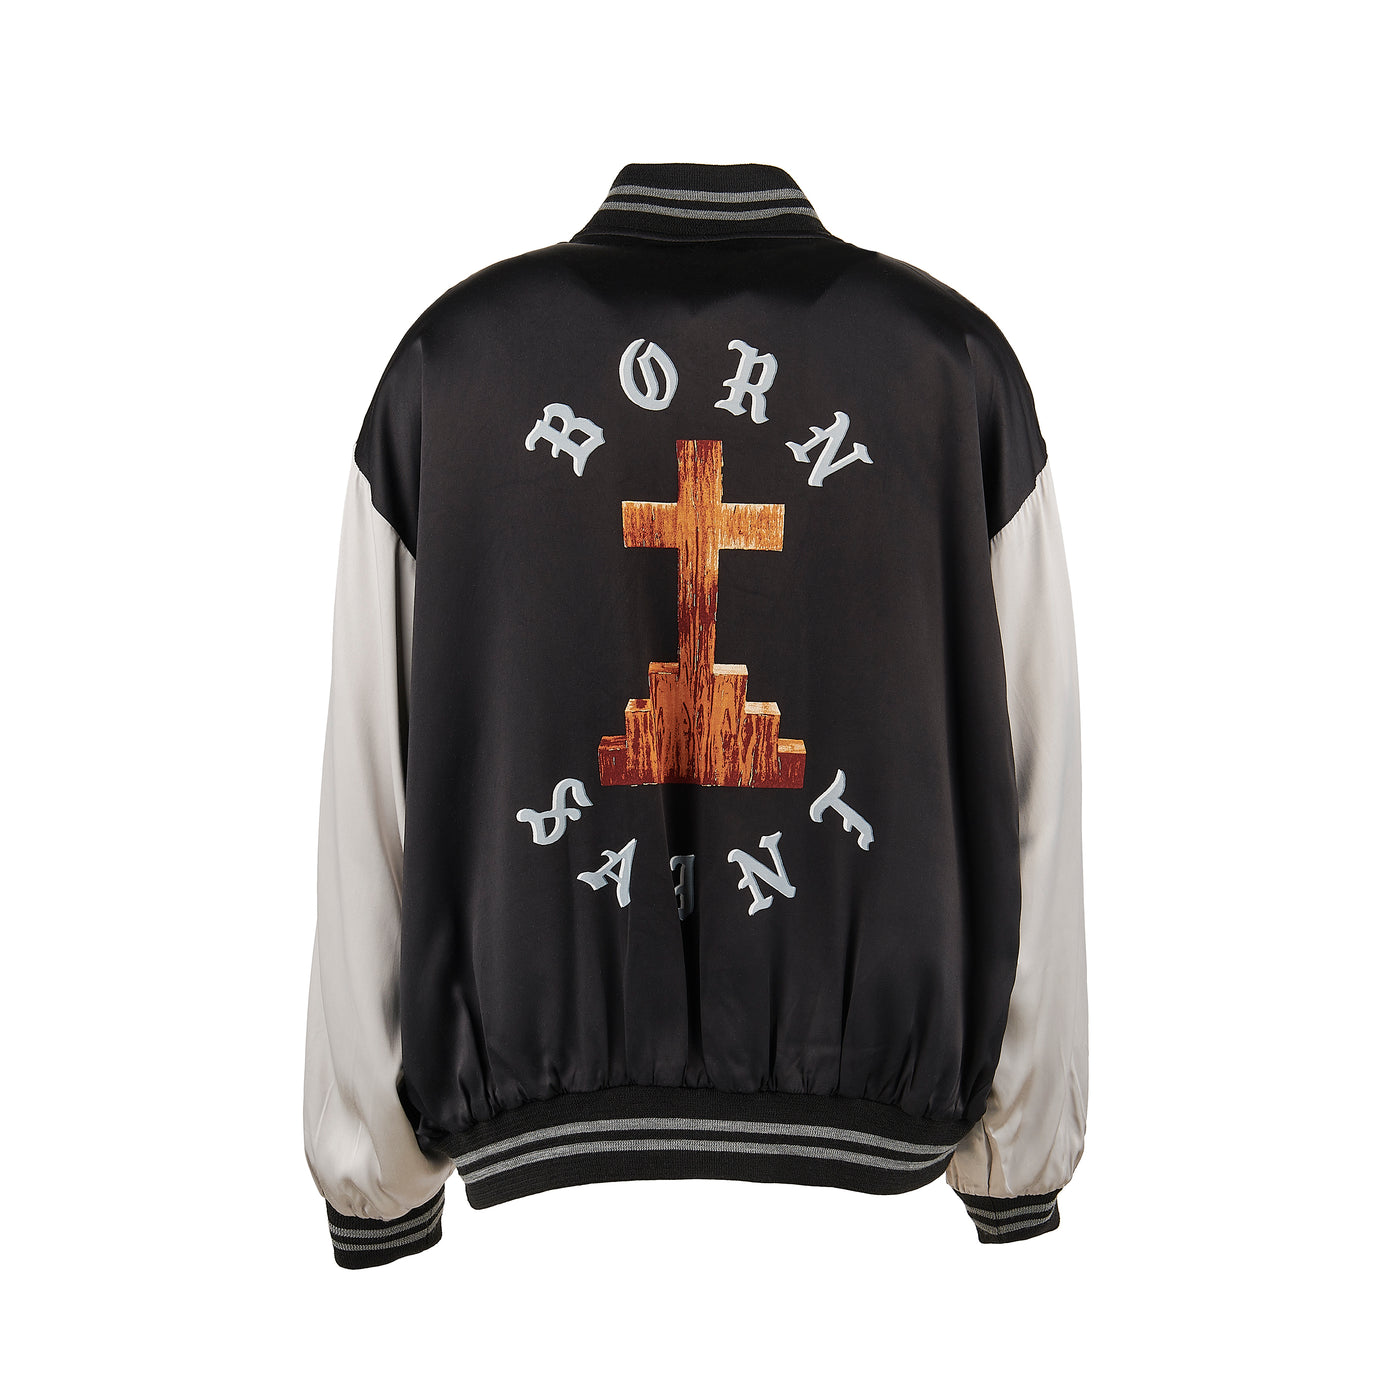 BR_SATIN JACKET | Why are you here?